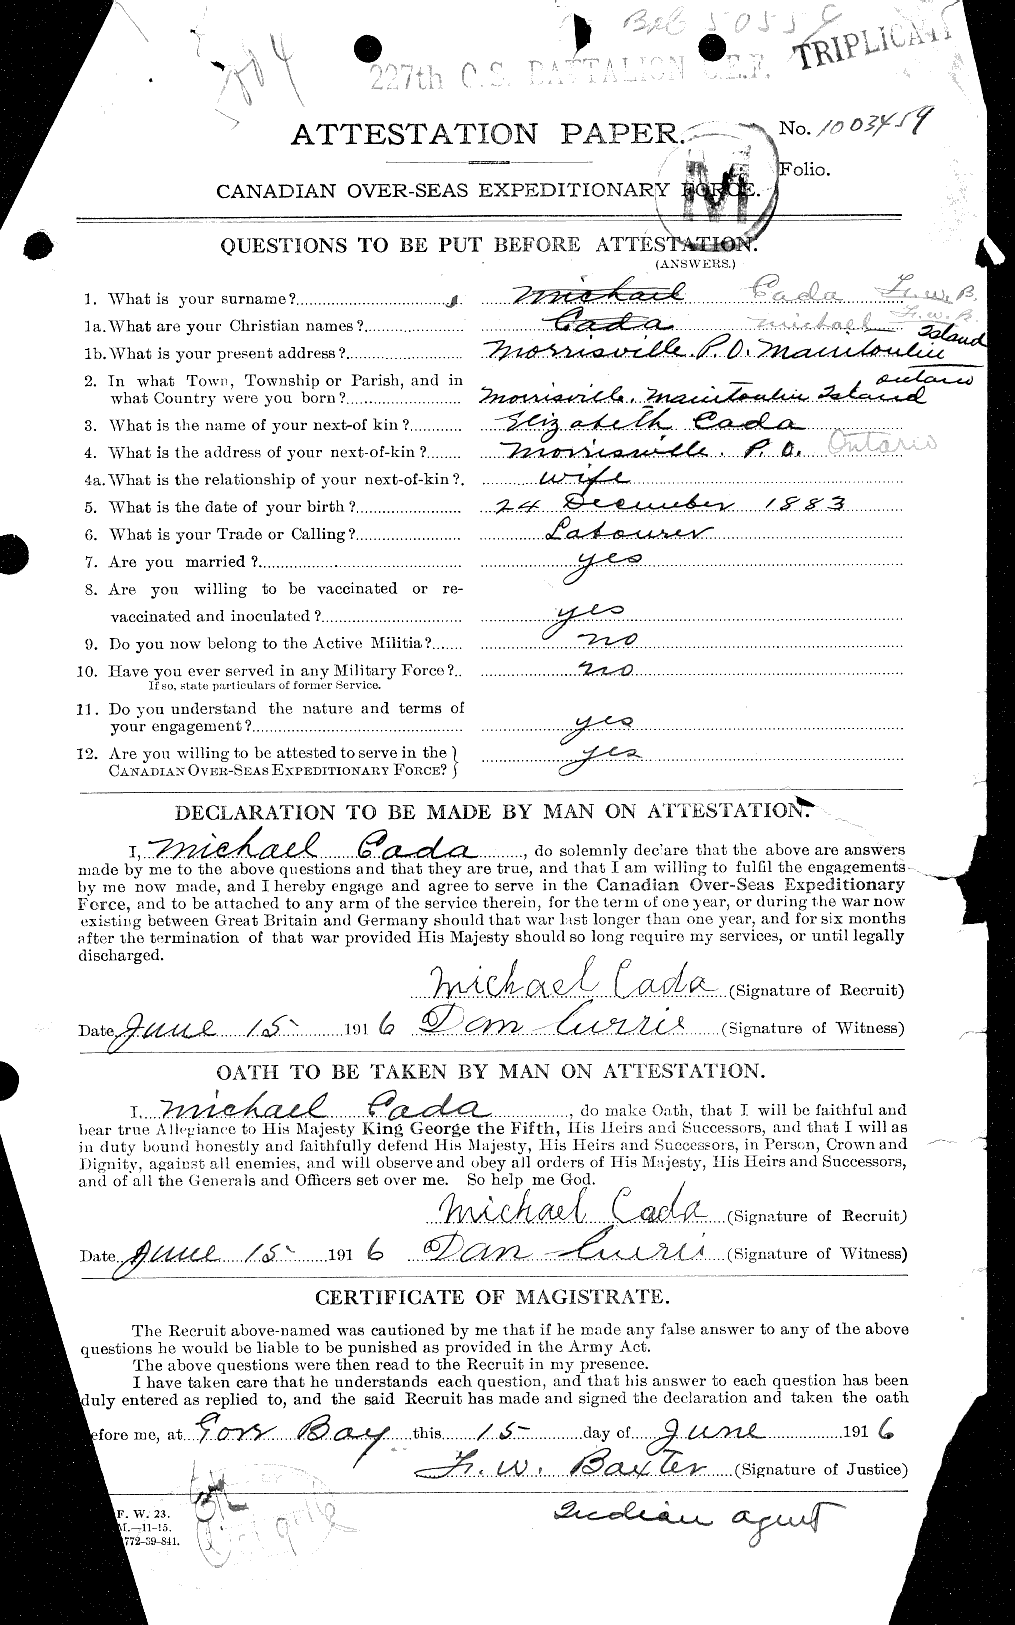 Personnel Records of the First World War - CEF 001495a